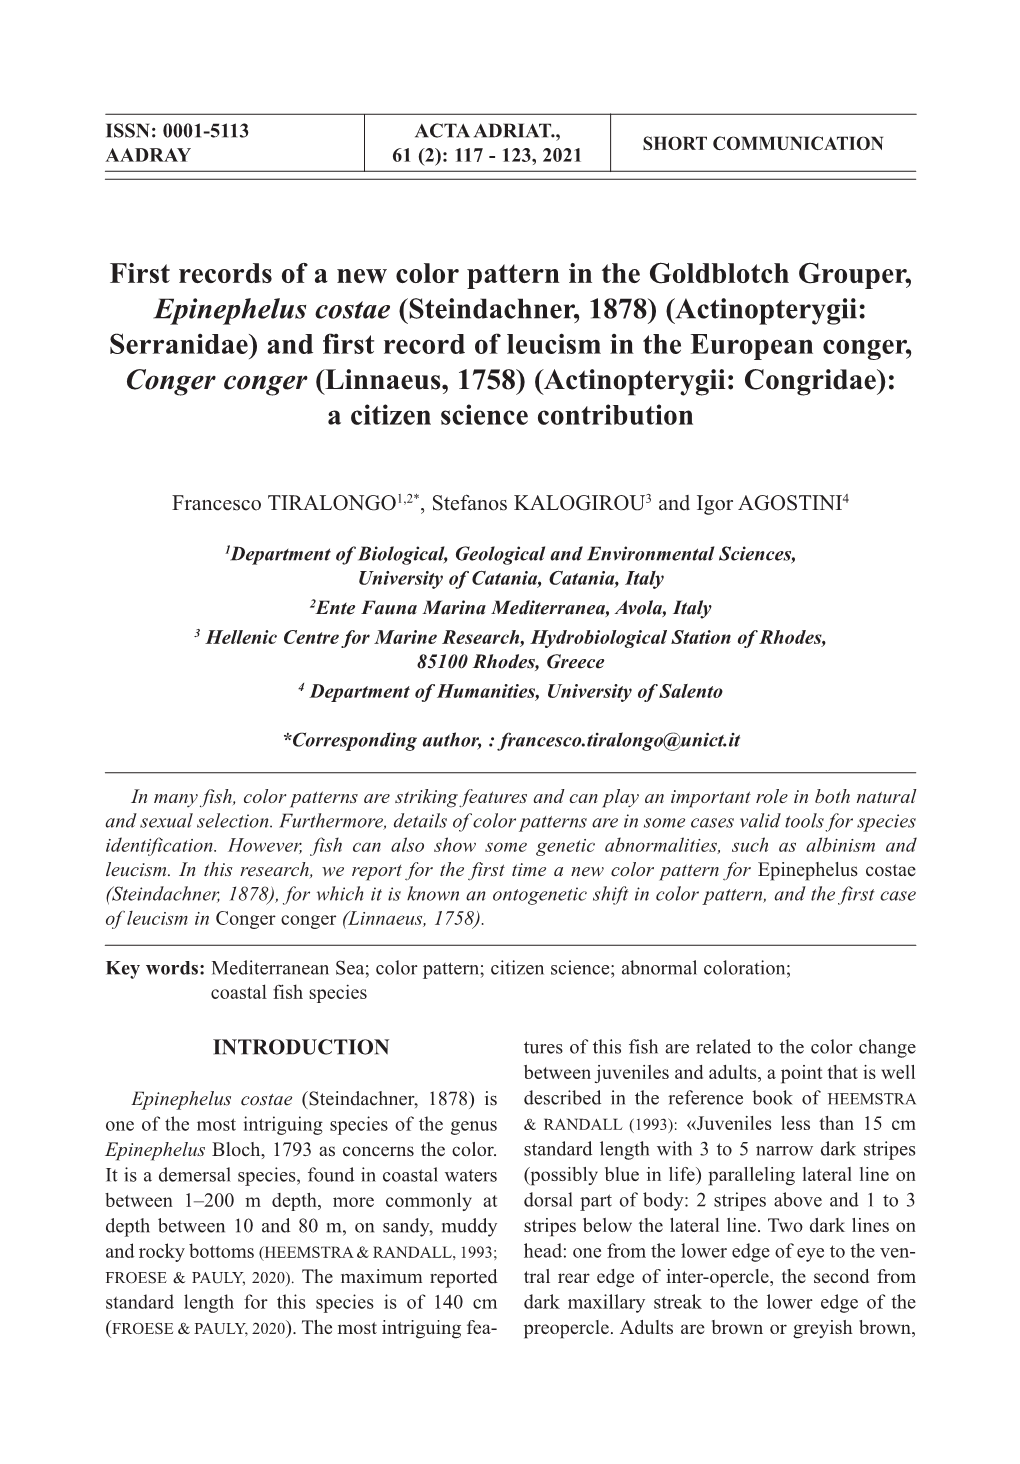 First Records of a New Color Pattern in the Goldblotch Grouper, Epinephelus Costae (Steindachner, 1878) (Actinopterygii: Serrani